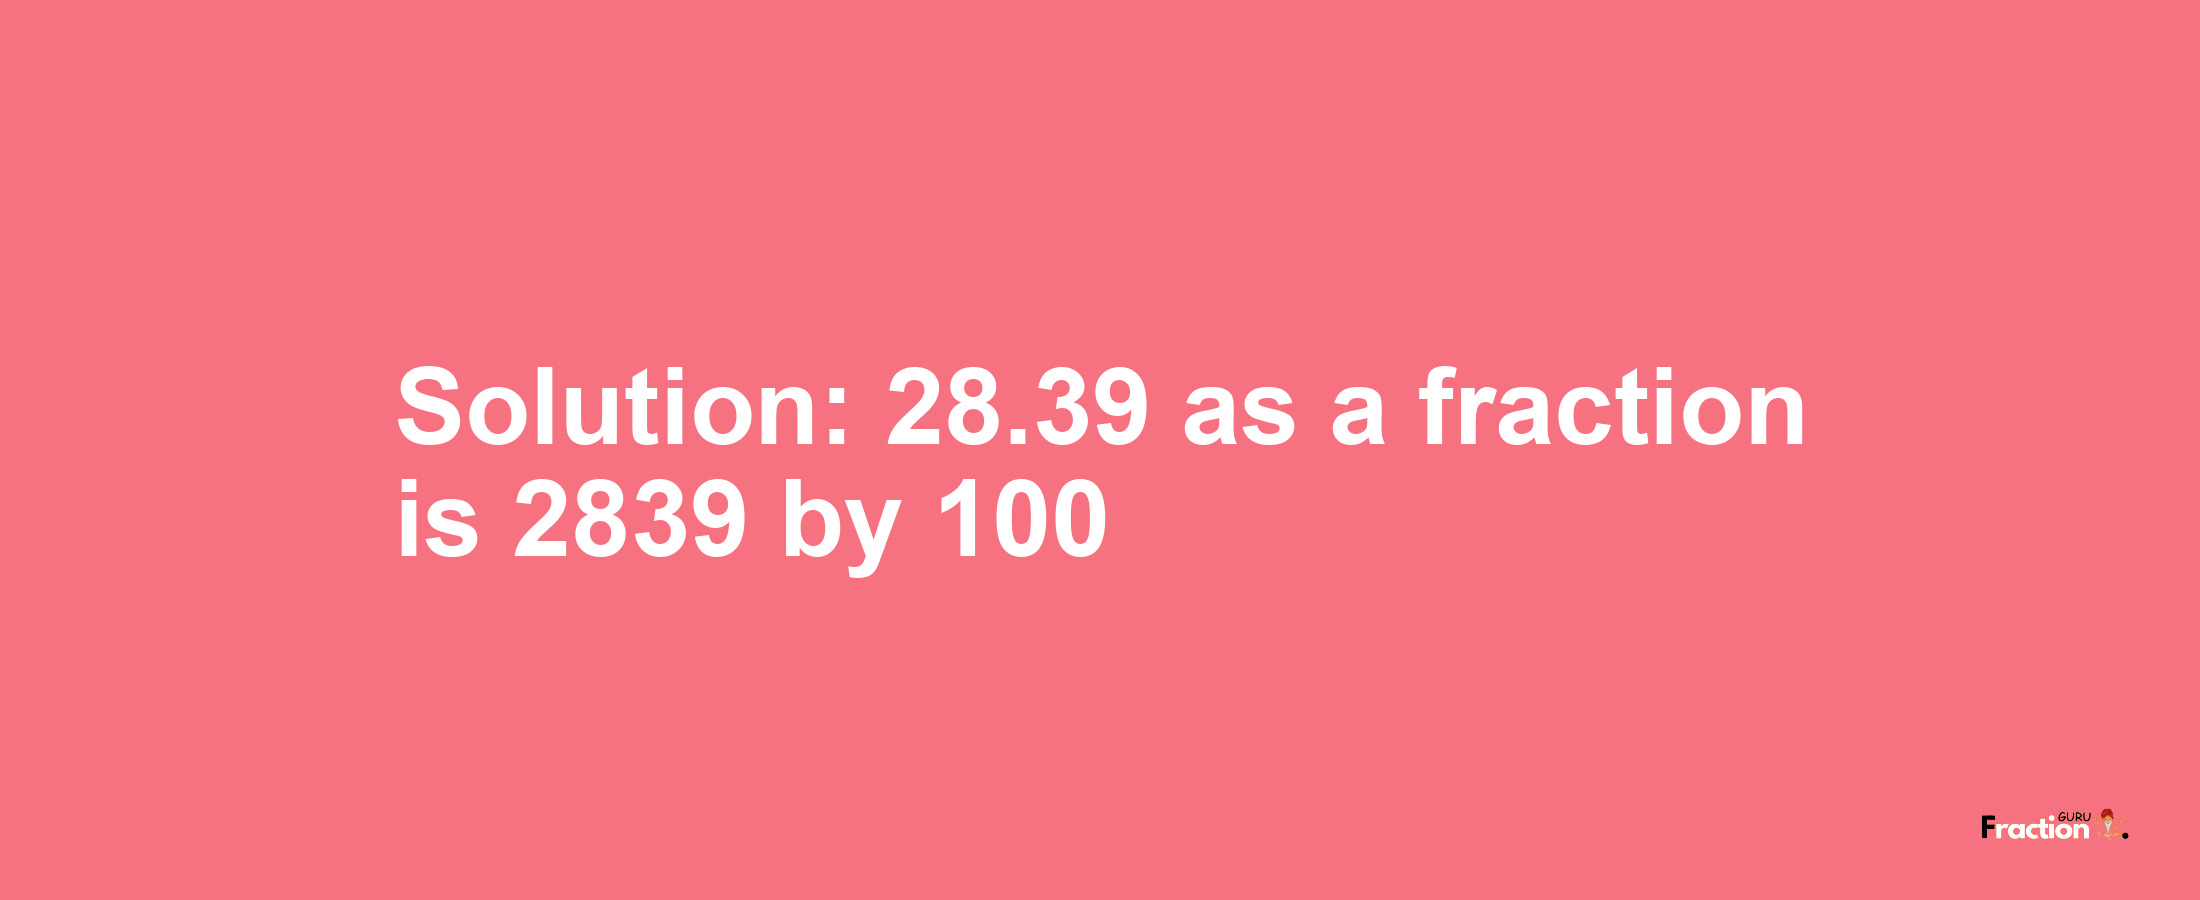 Solution:28.39 as a fraction is 2839/100